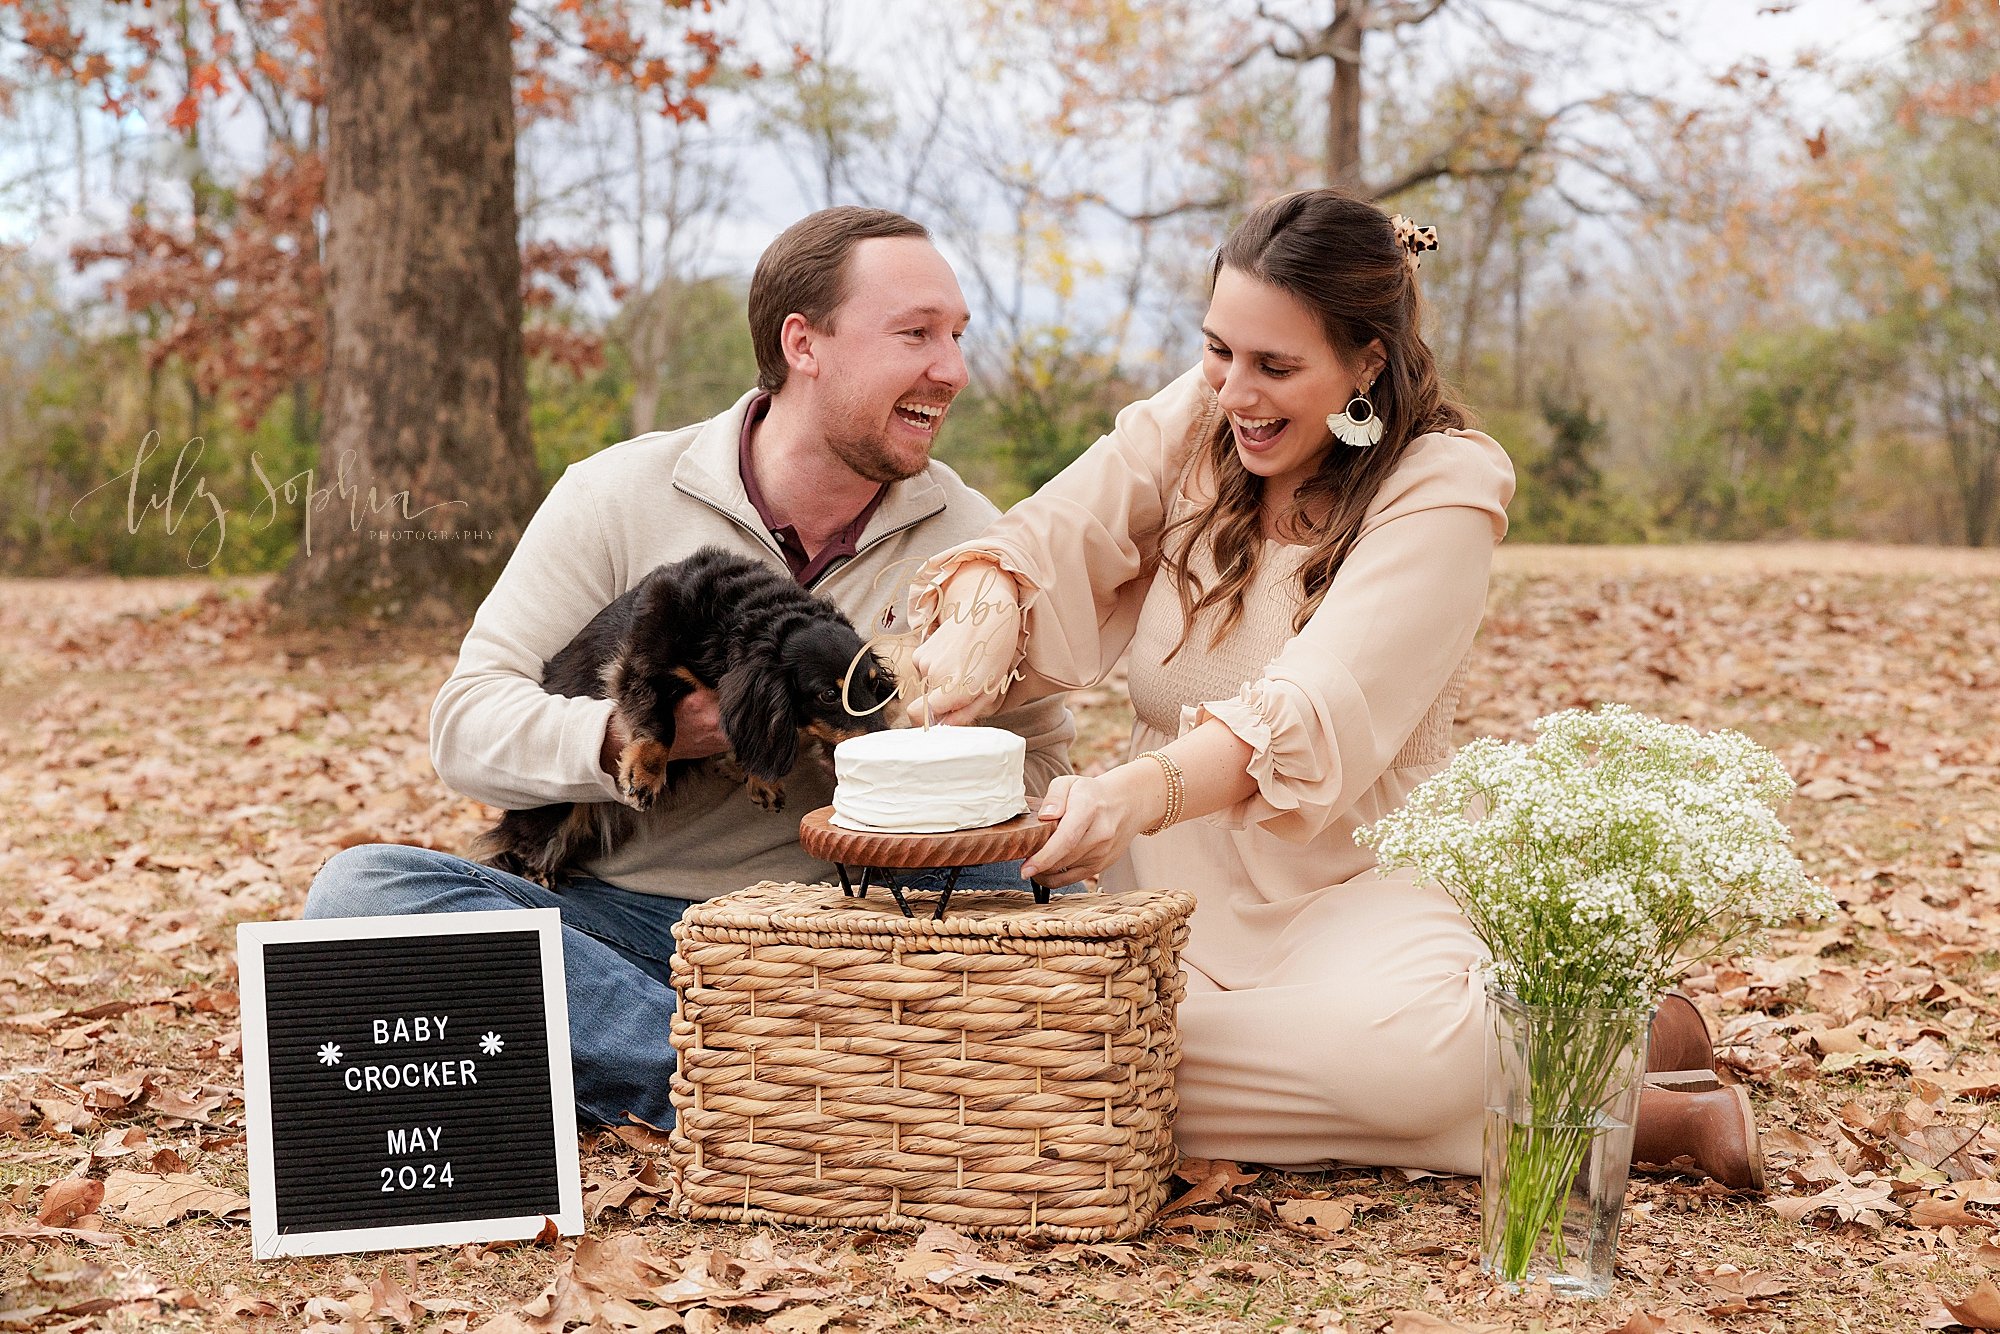 intown-atlanta-morningside-decatur-brookhaven-buckhead-outdoor-couples-maternity-fall-photoshoot-daschunds-doxies-gender-reveal_6183.jpg